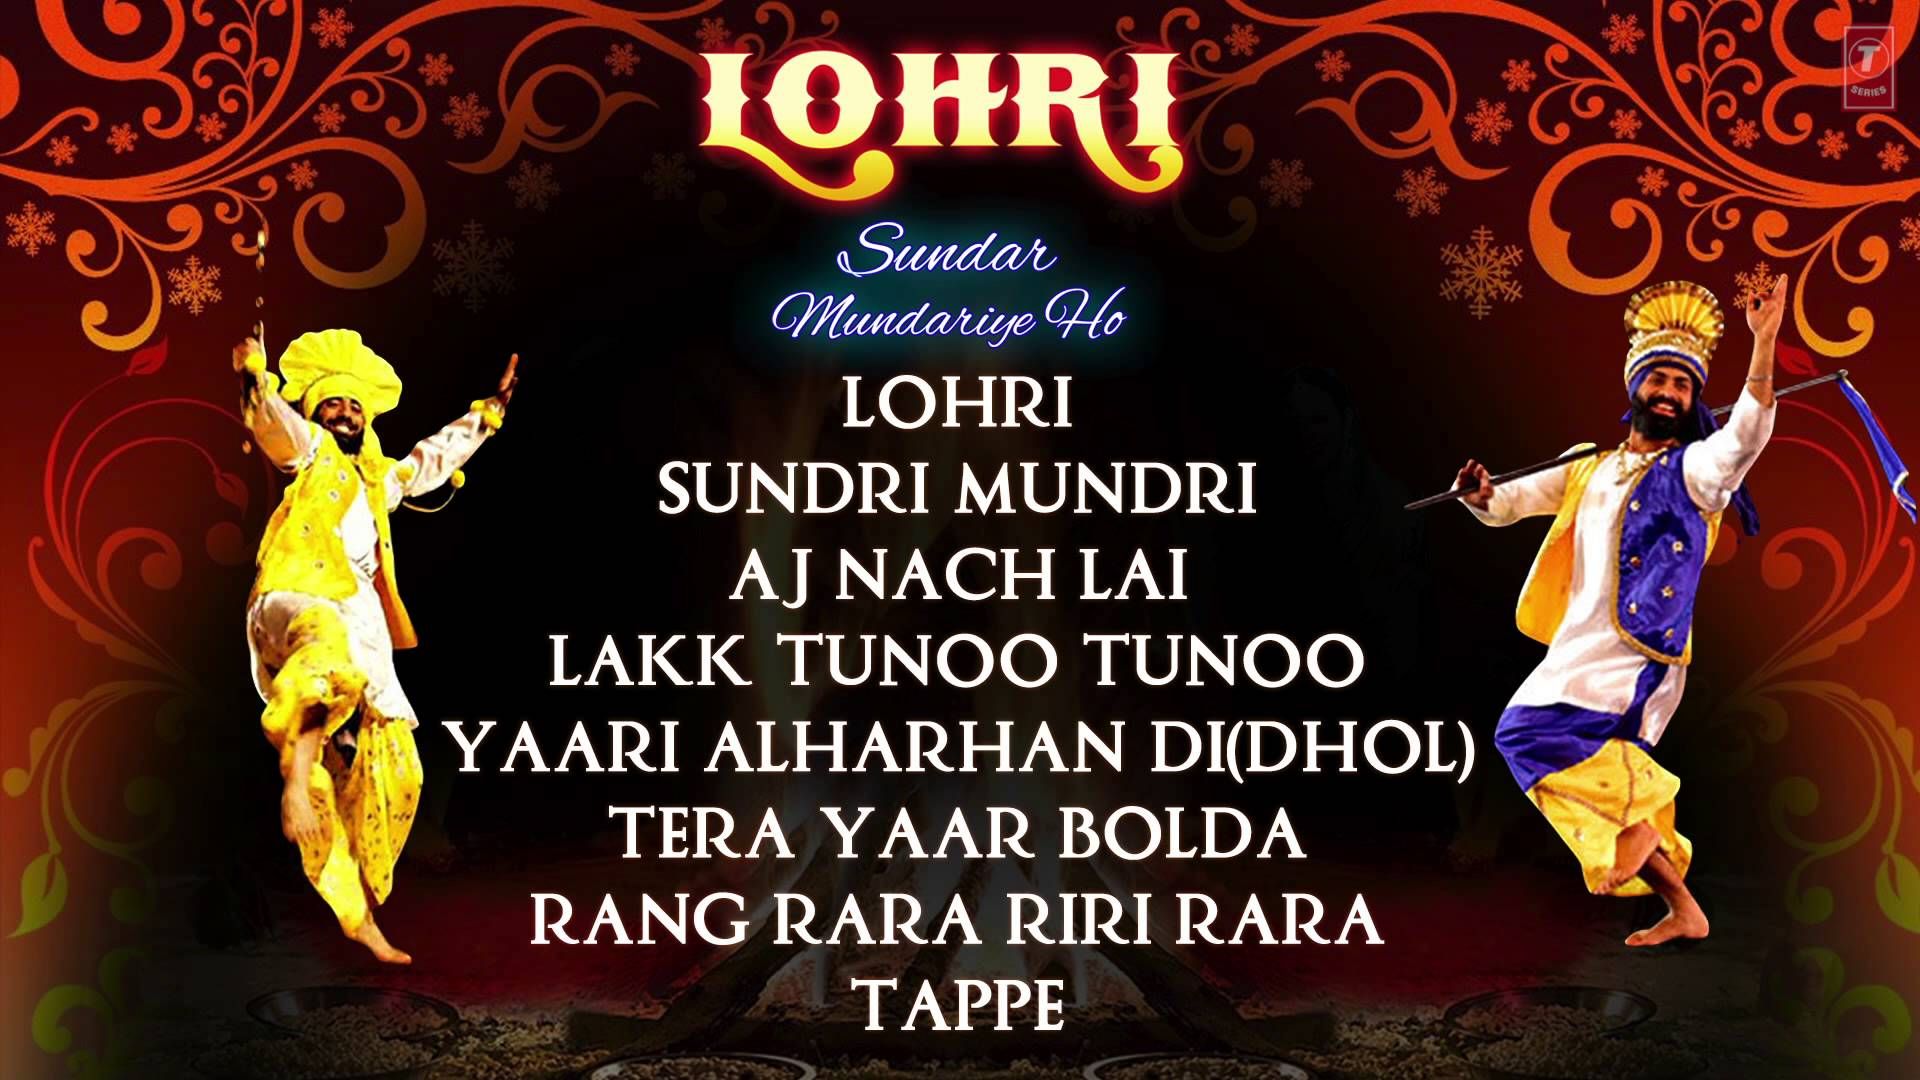 Happy Lohri Festival Image Song Wishes Quotes Free Download